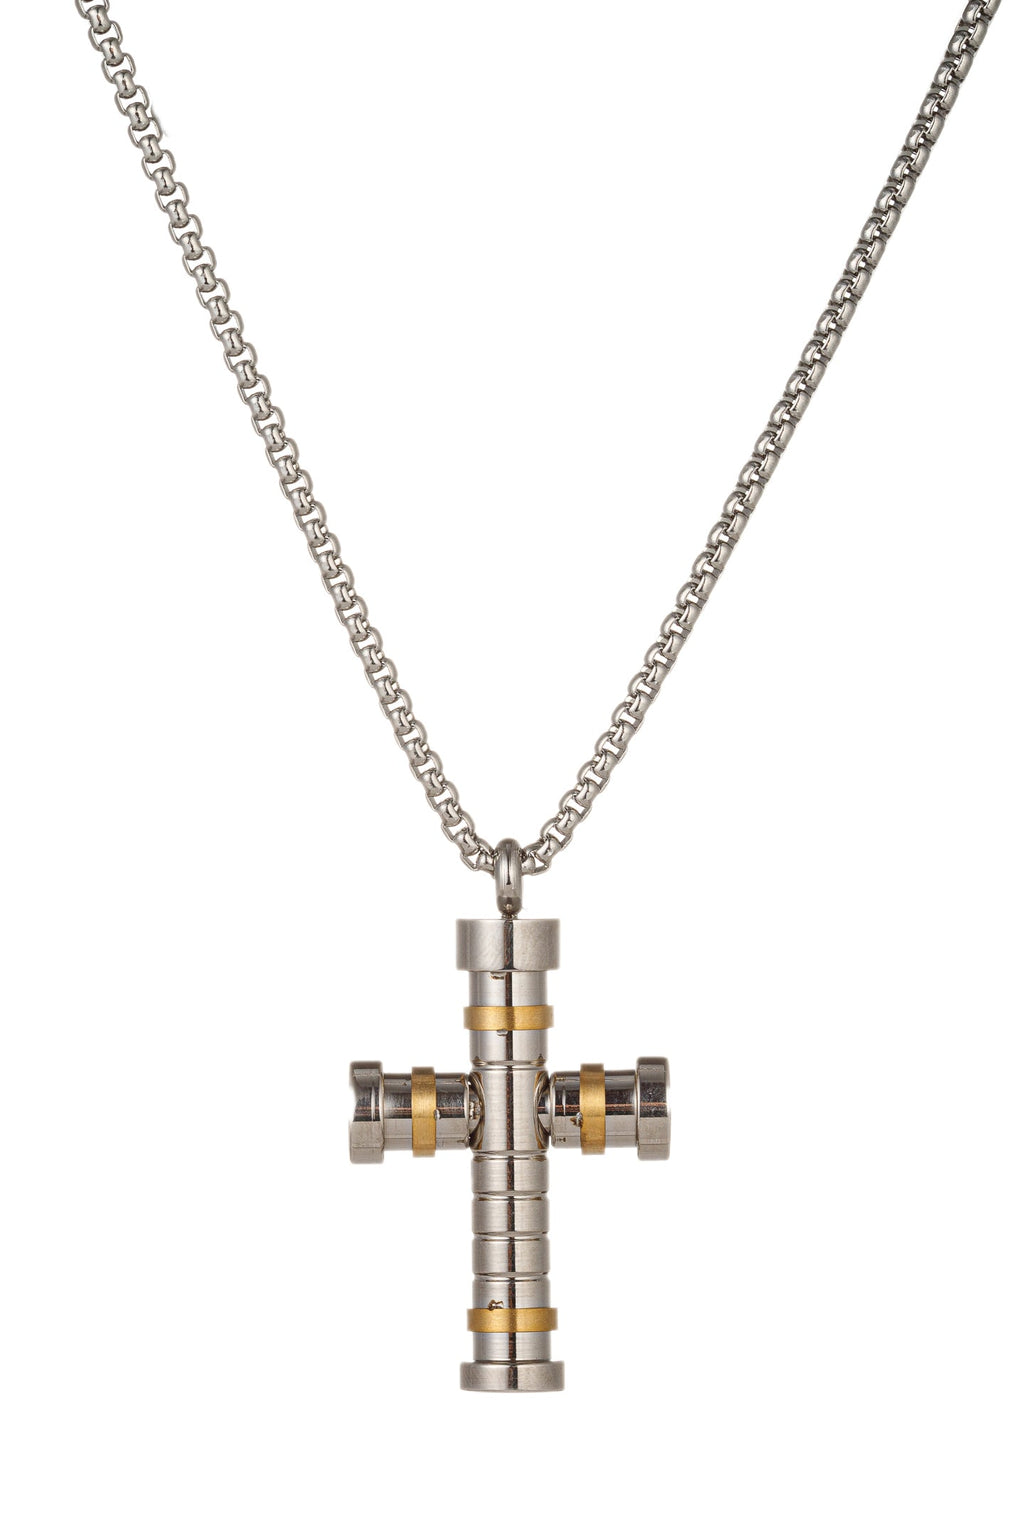 Embrace Faith and Style with Our Jordan Cross Pendant Necklace.